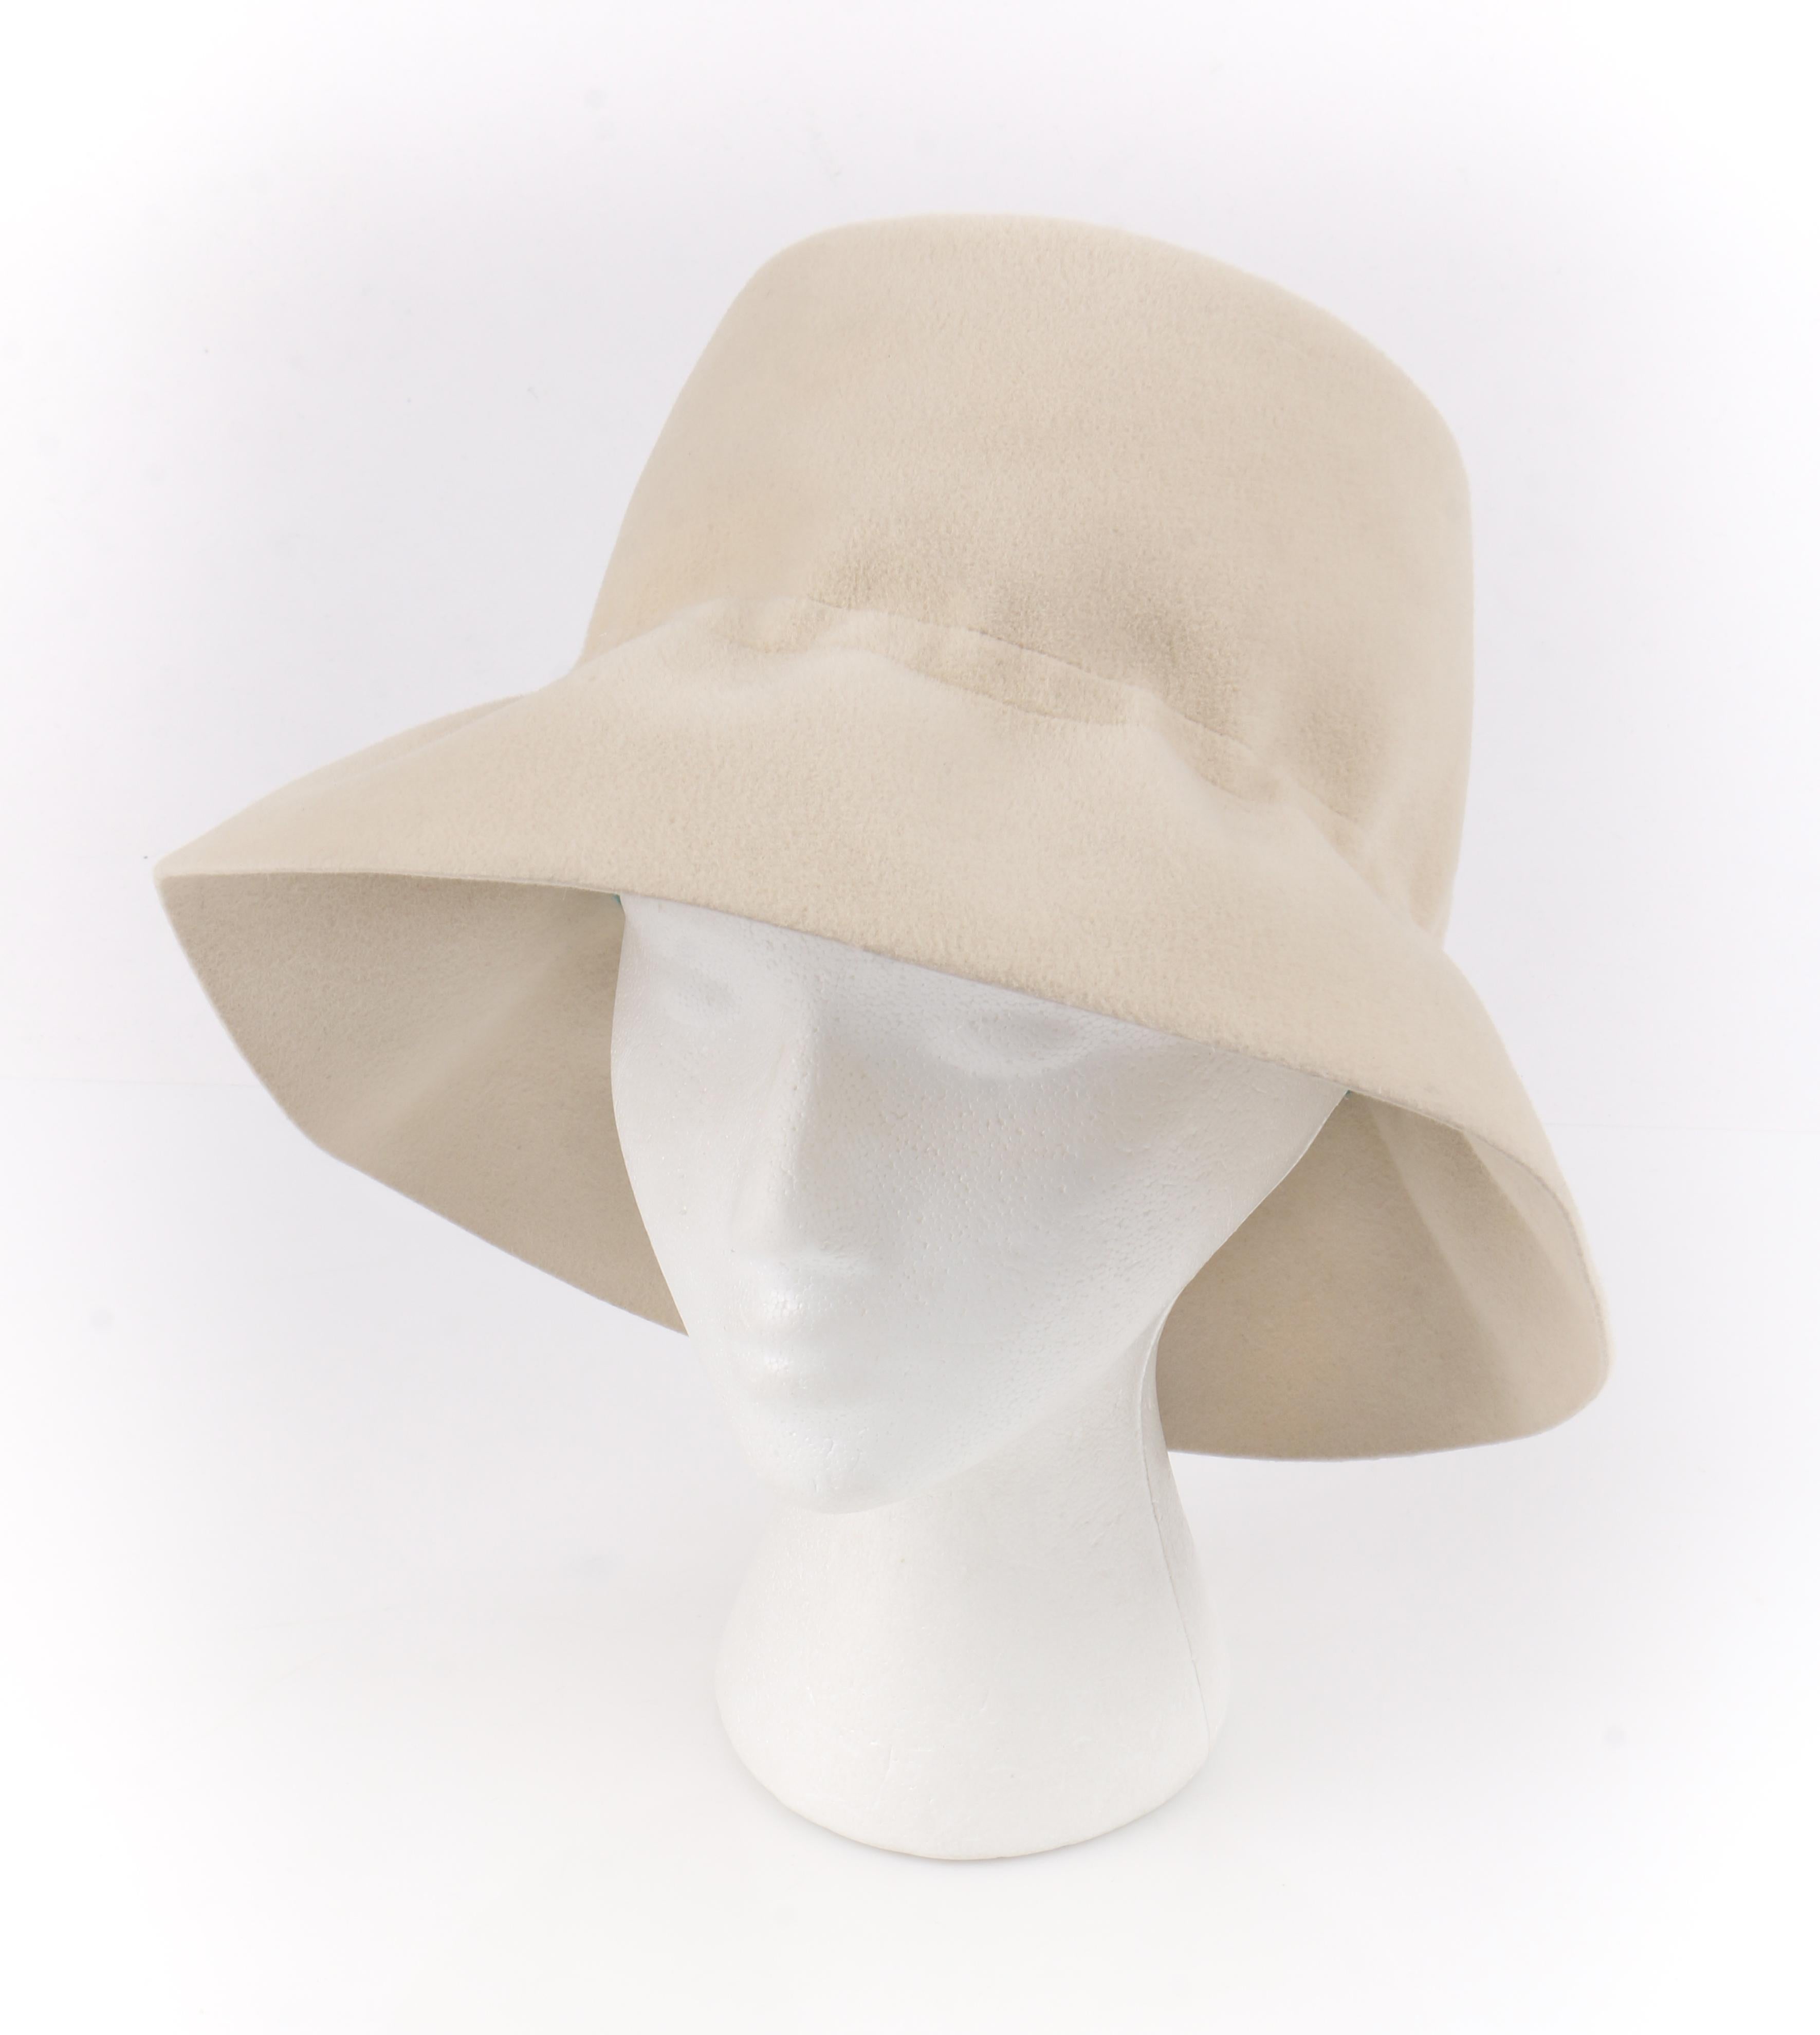 YVES SAINT LAURENT c.1960’s YSL Cream Felted Fur Structured Bucket Hat
 
Circa: 1960’s
Label(s): Yves Saint Laurent / Paris - New York / Luxuria Imported Body Made In Italy
Style: Bucket Hat
Color(s): Cream and brown
Lined: No 
Unmarked Fabric